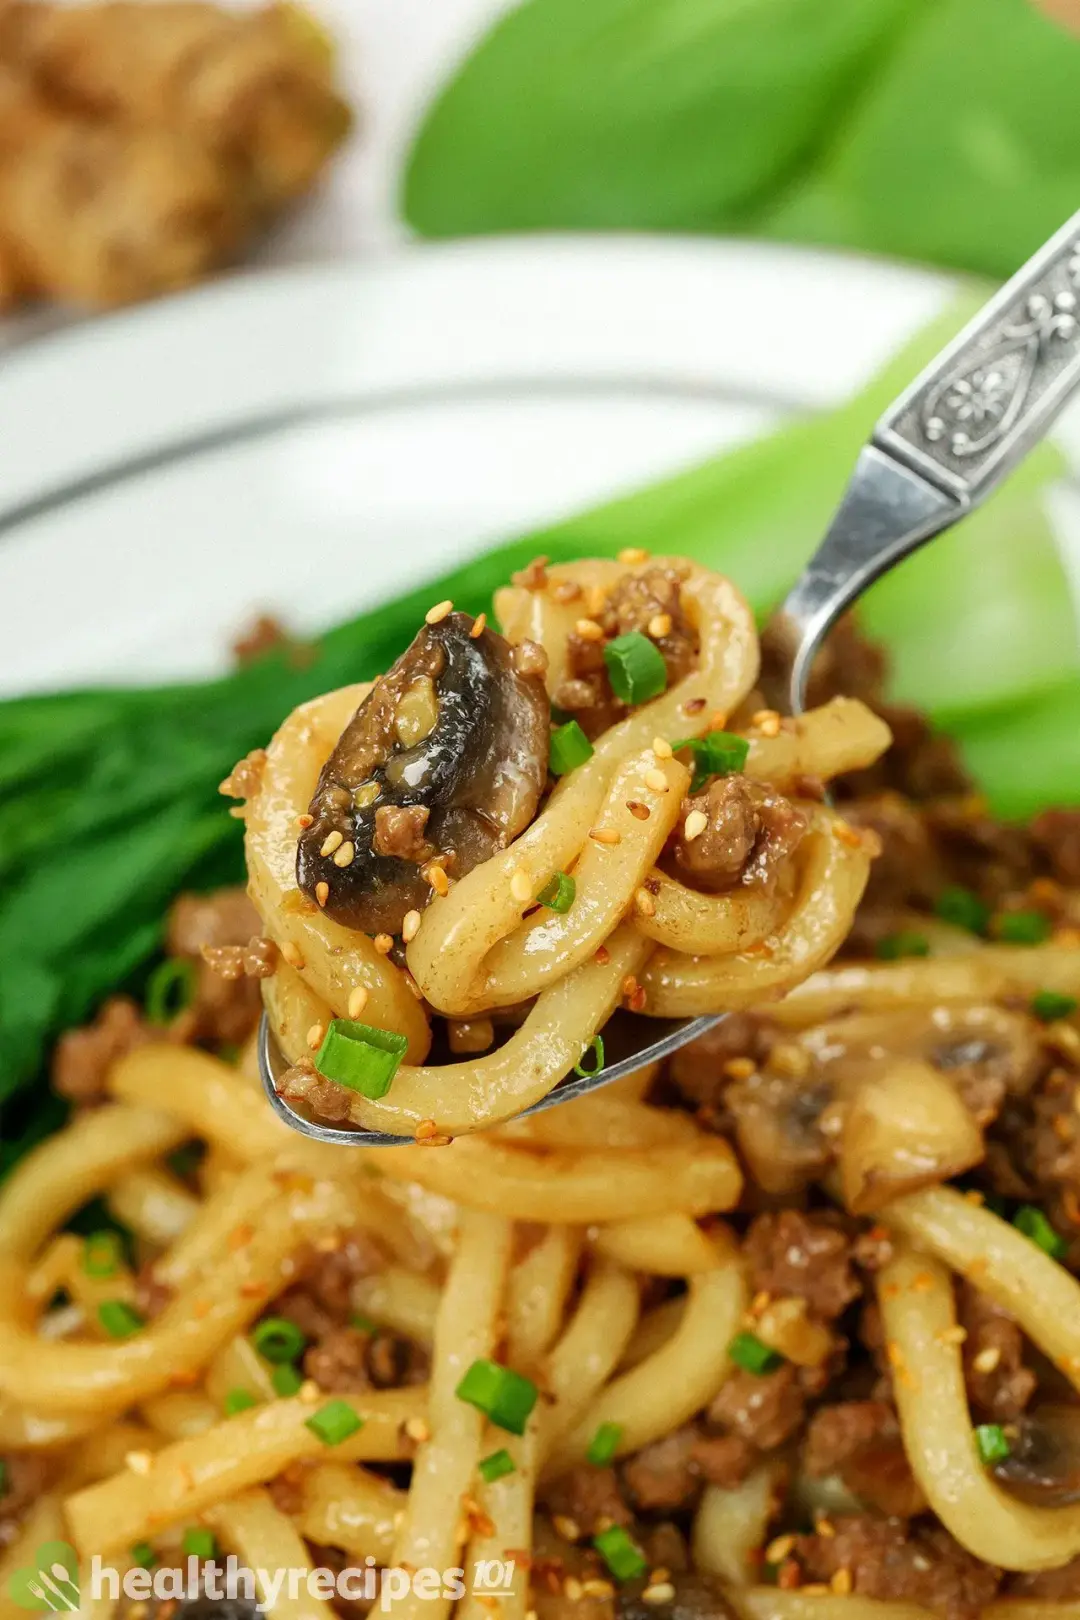 How Healthy is Our Asian Beef and Noodles